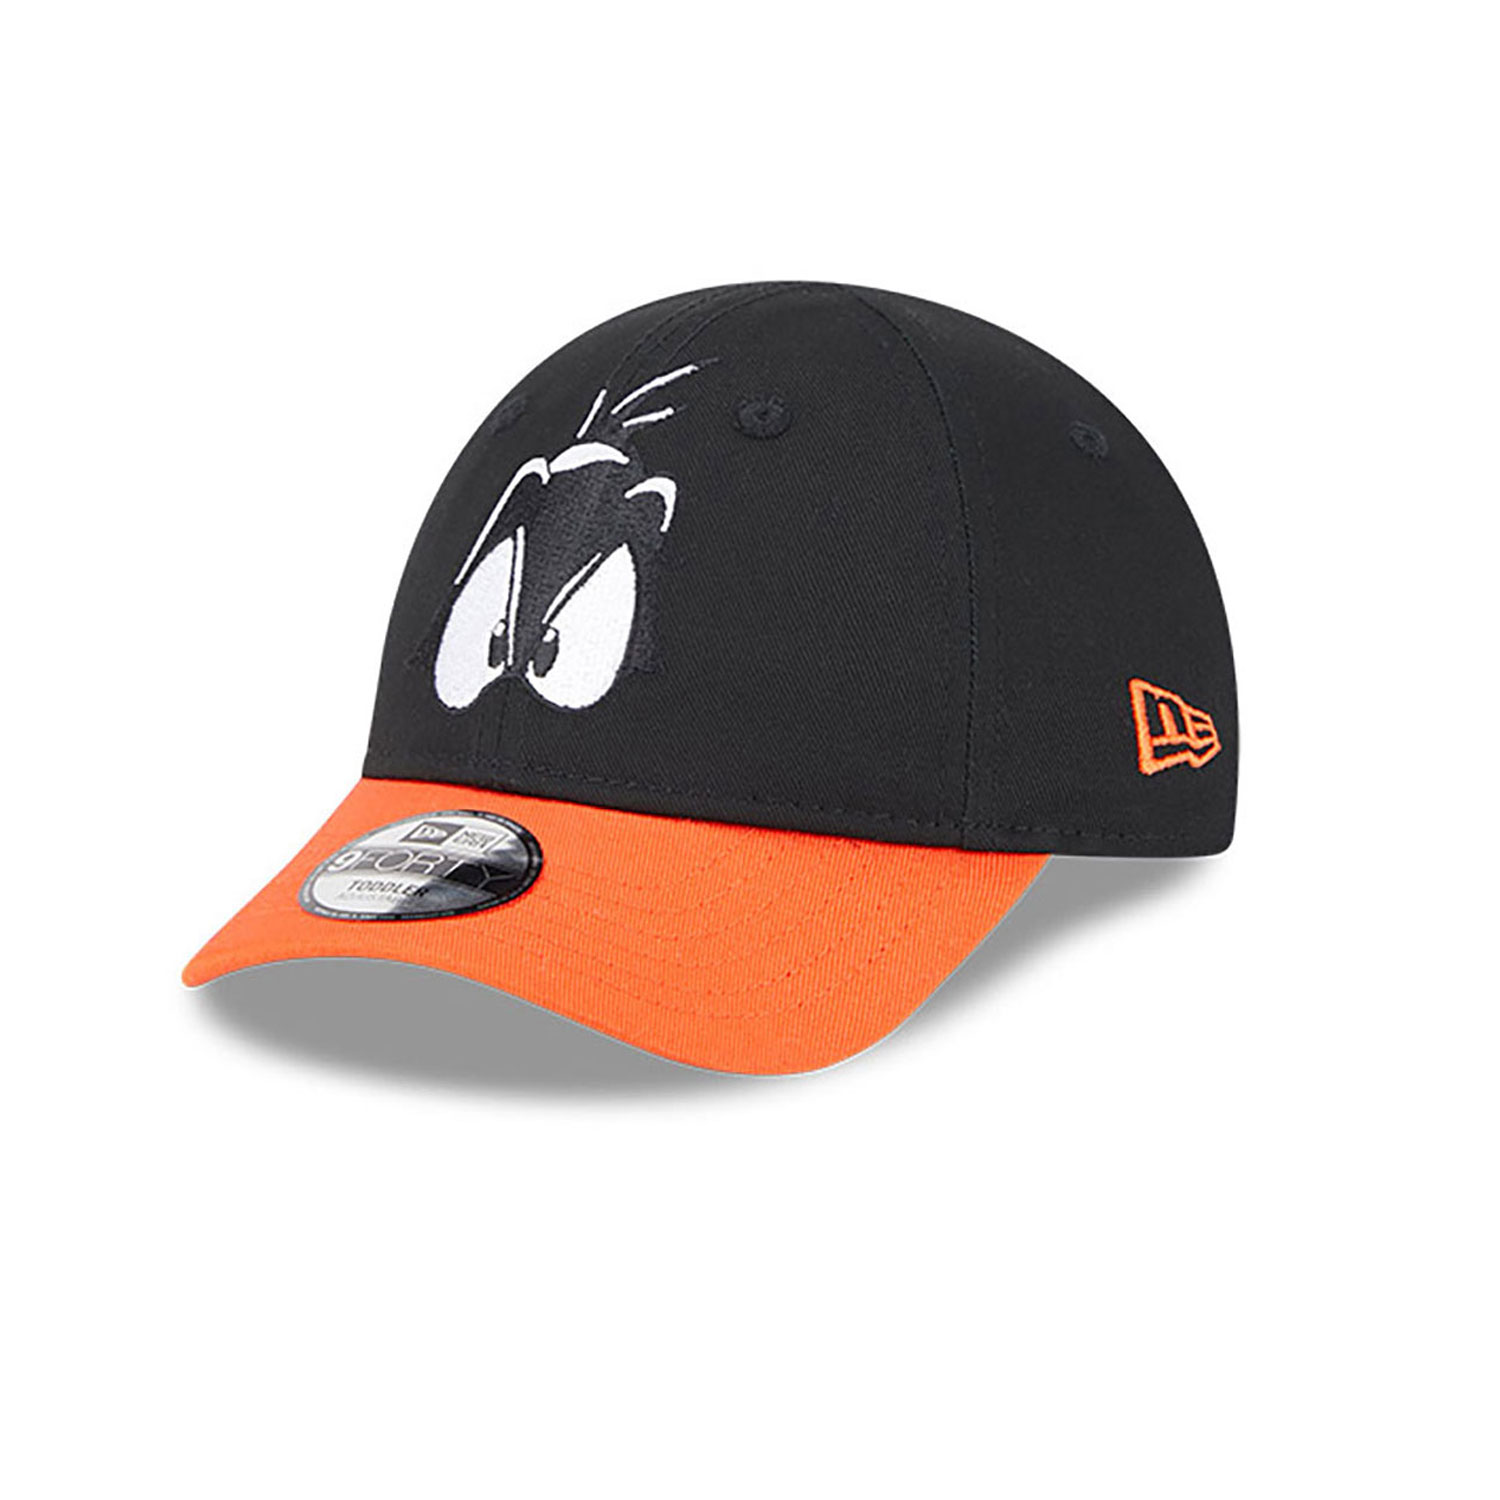 Casquette 9FORTY Daffy Duck Looney Tunes - Bébé